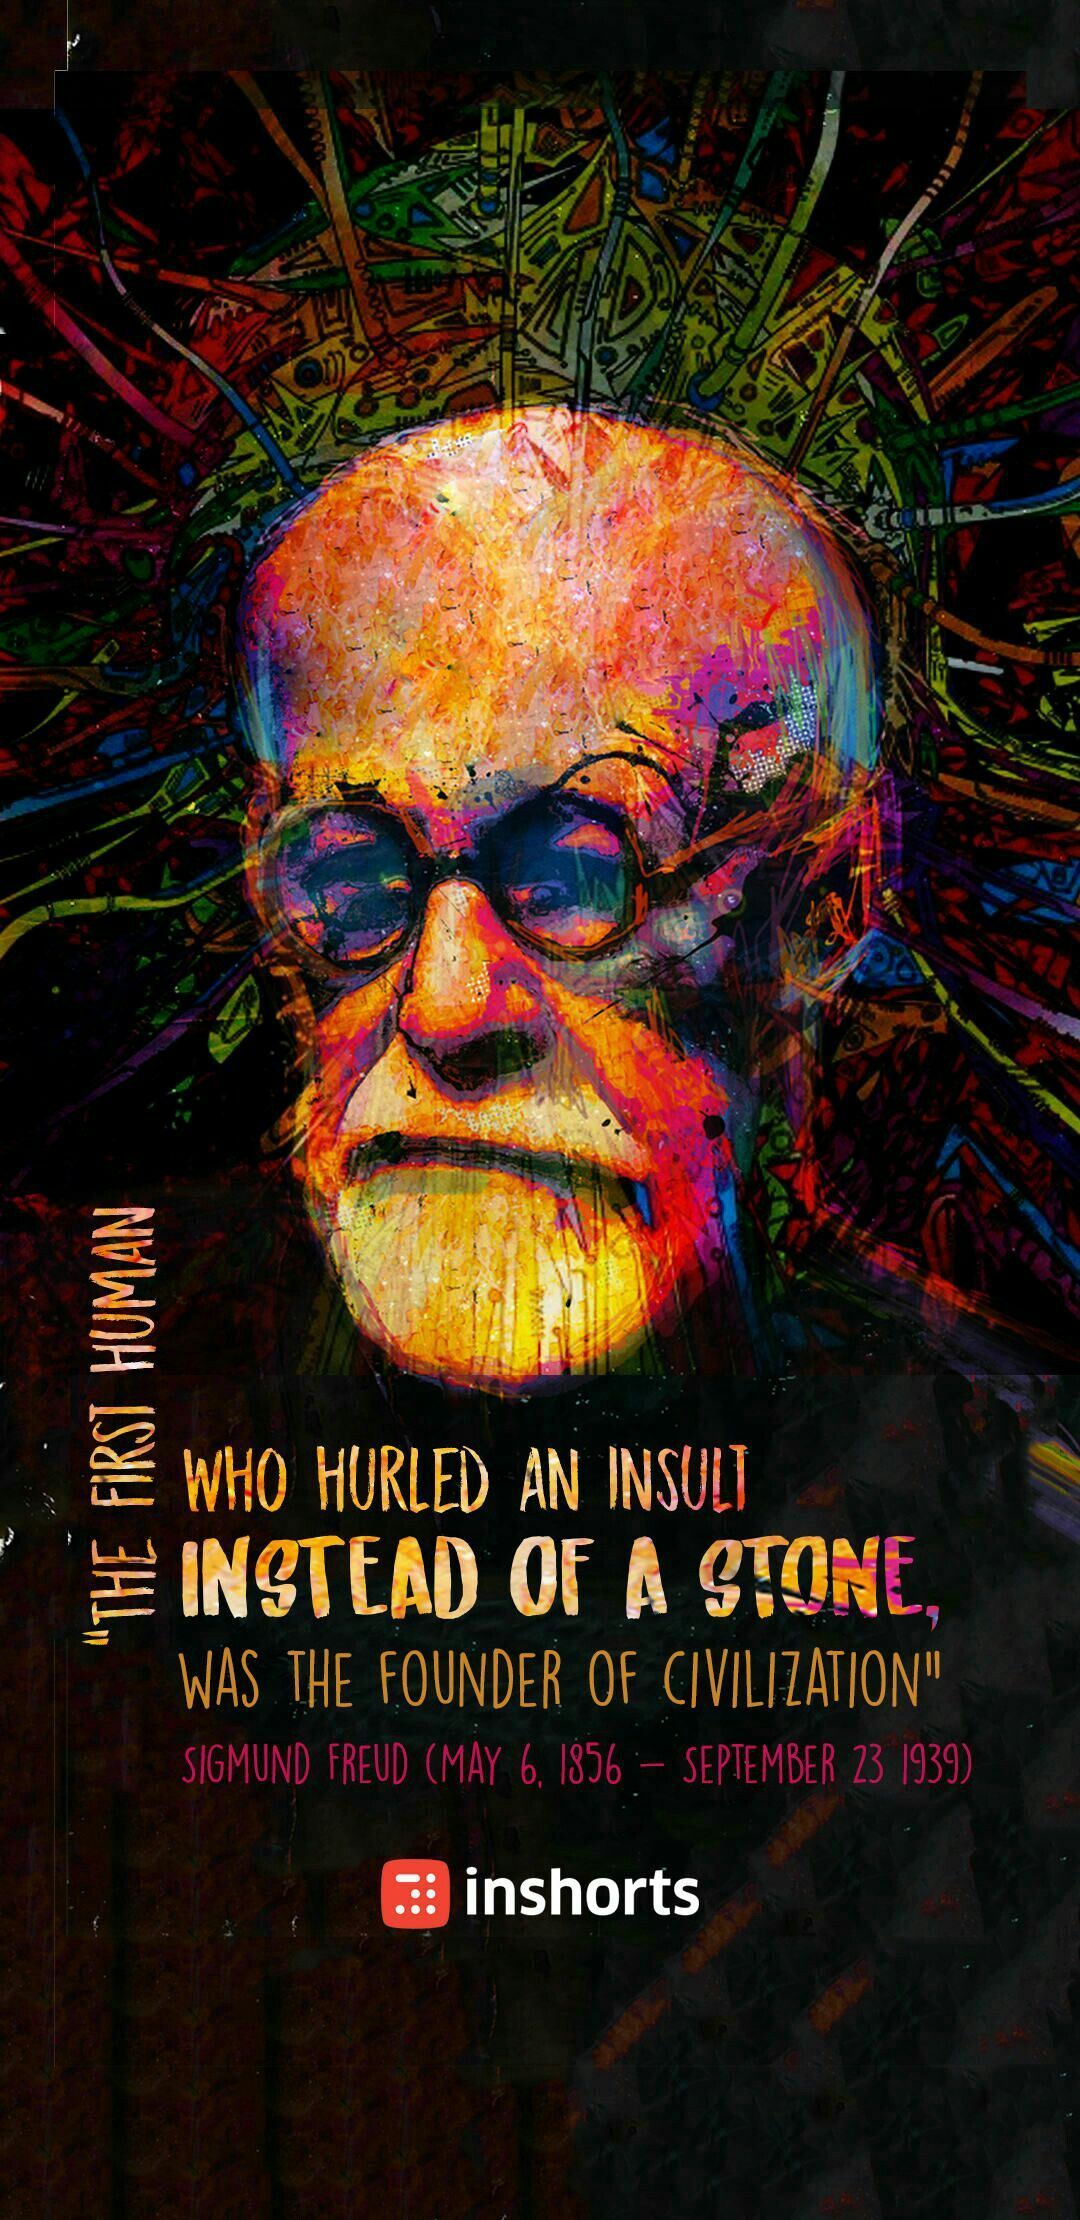 Quotes. Sigmund freud, Human, Insulting